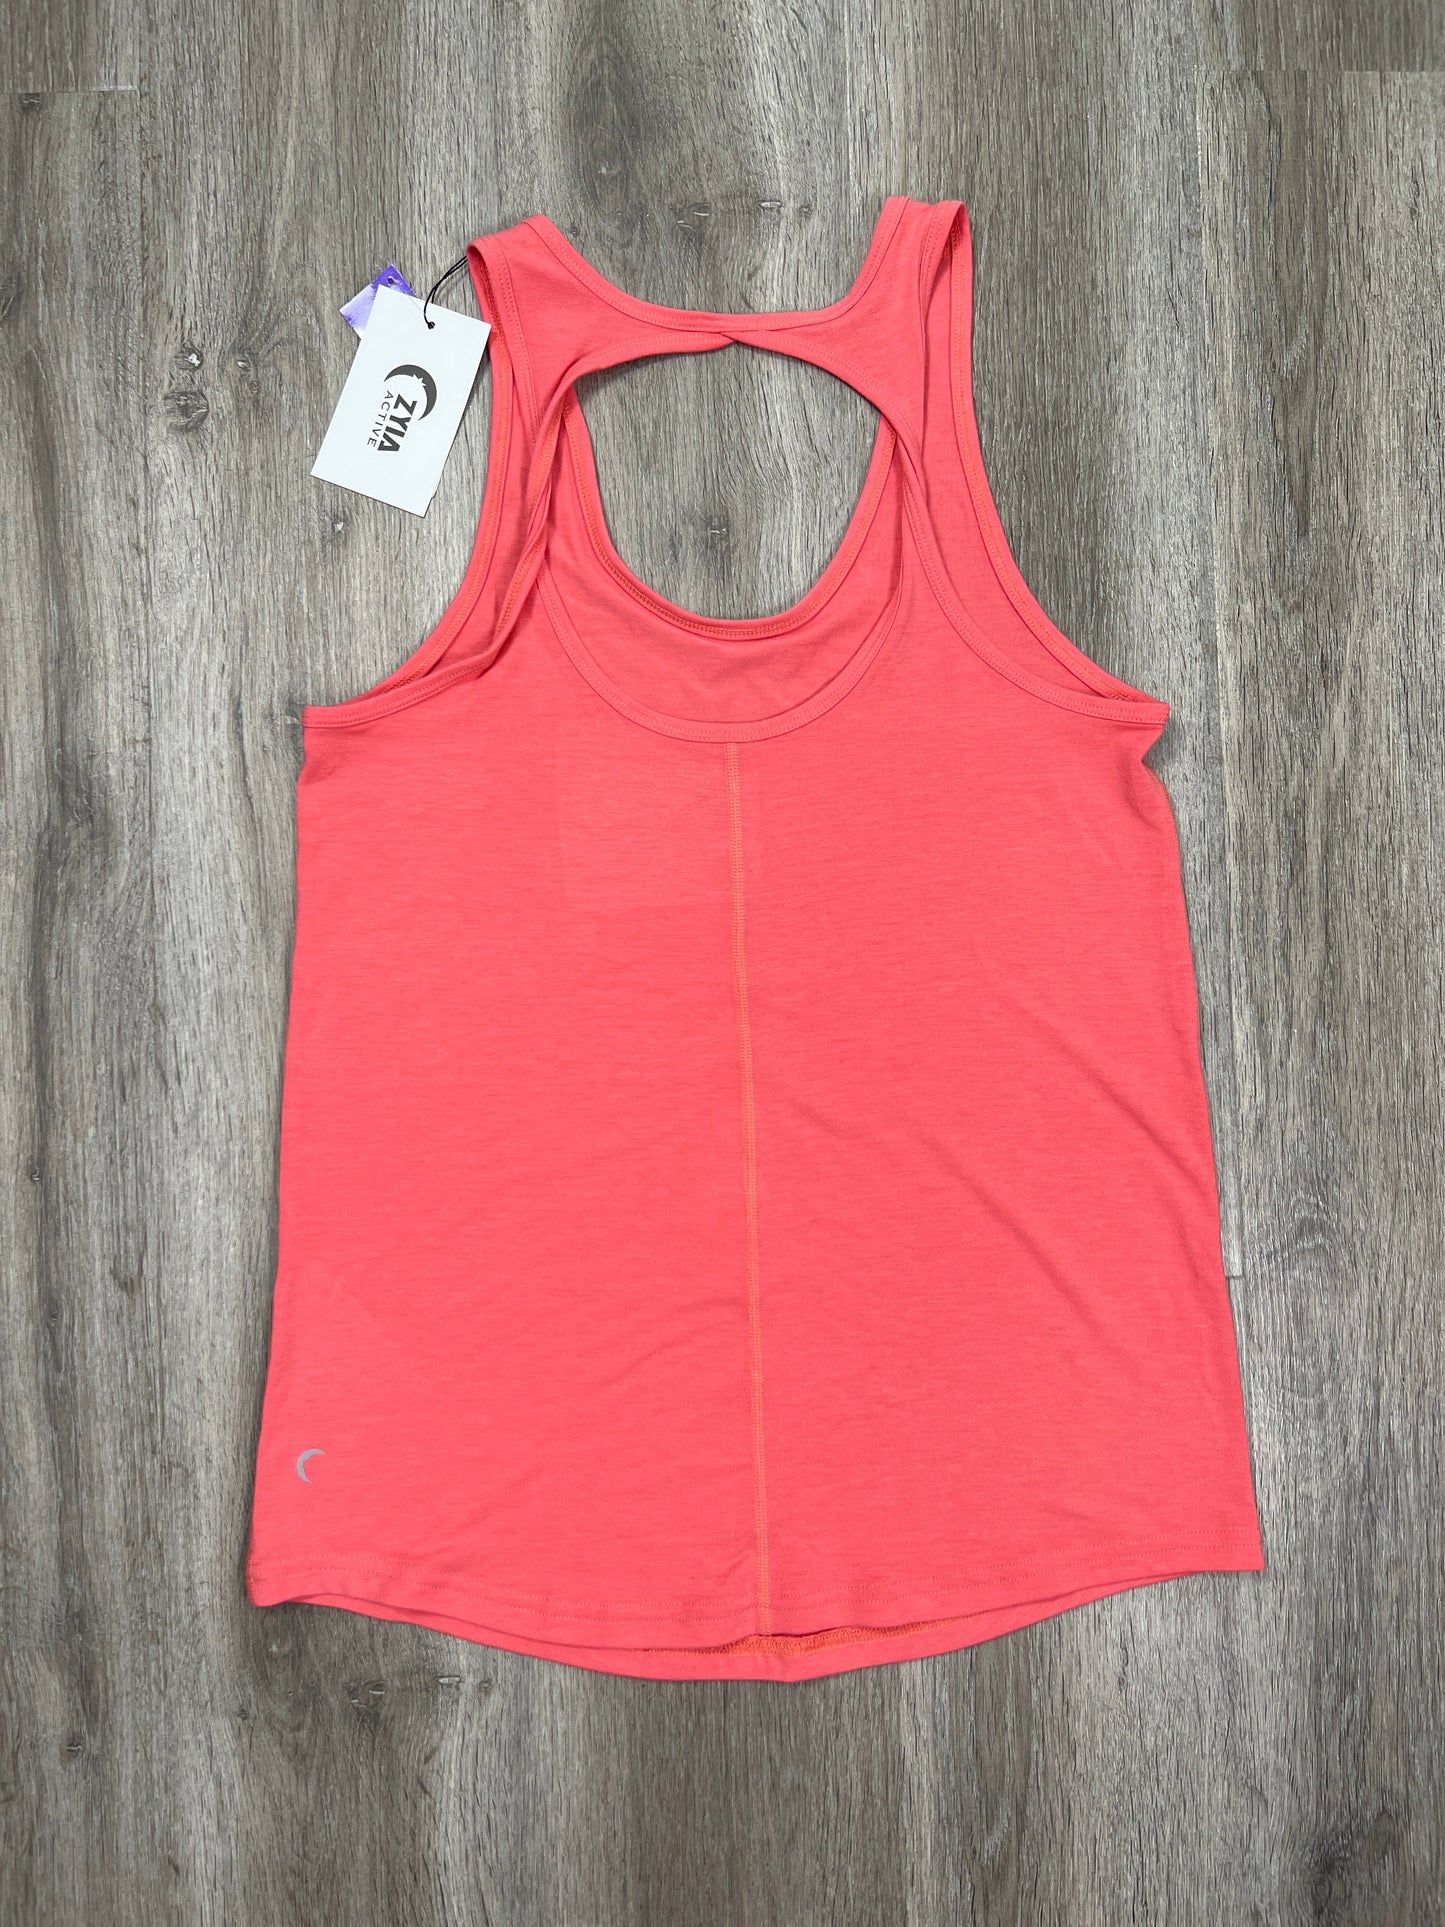 Pink Athletic Tank Top Zyia, Size M